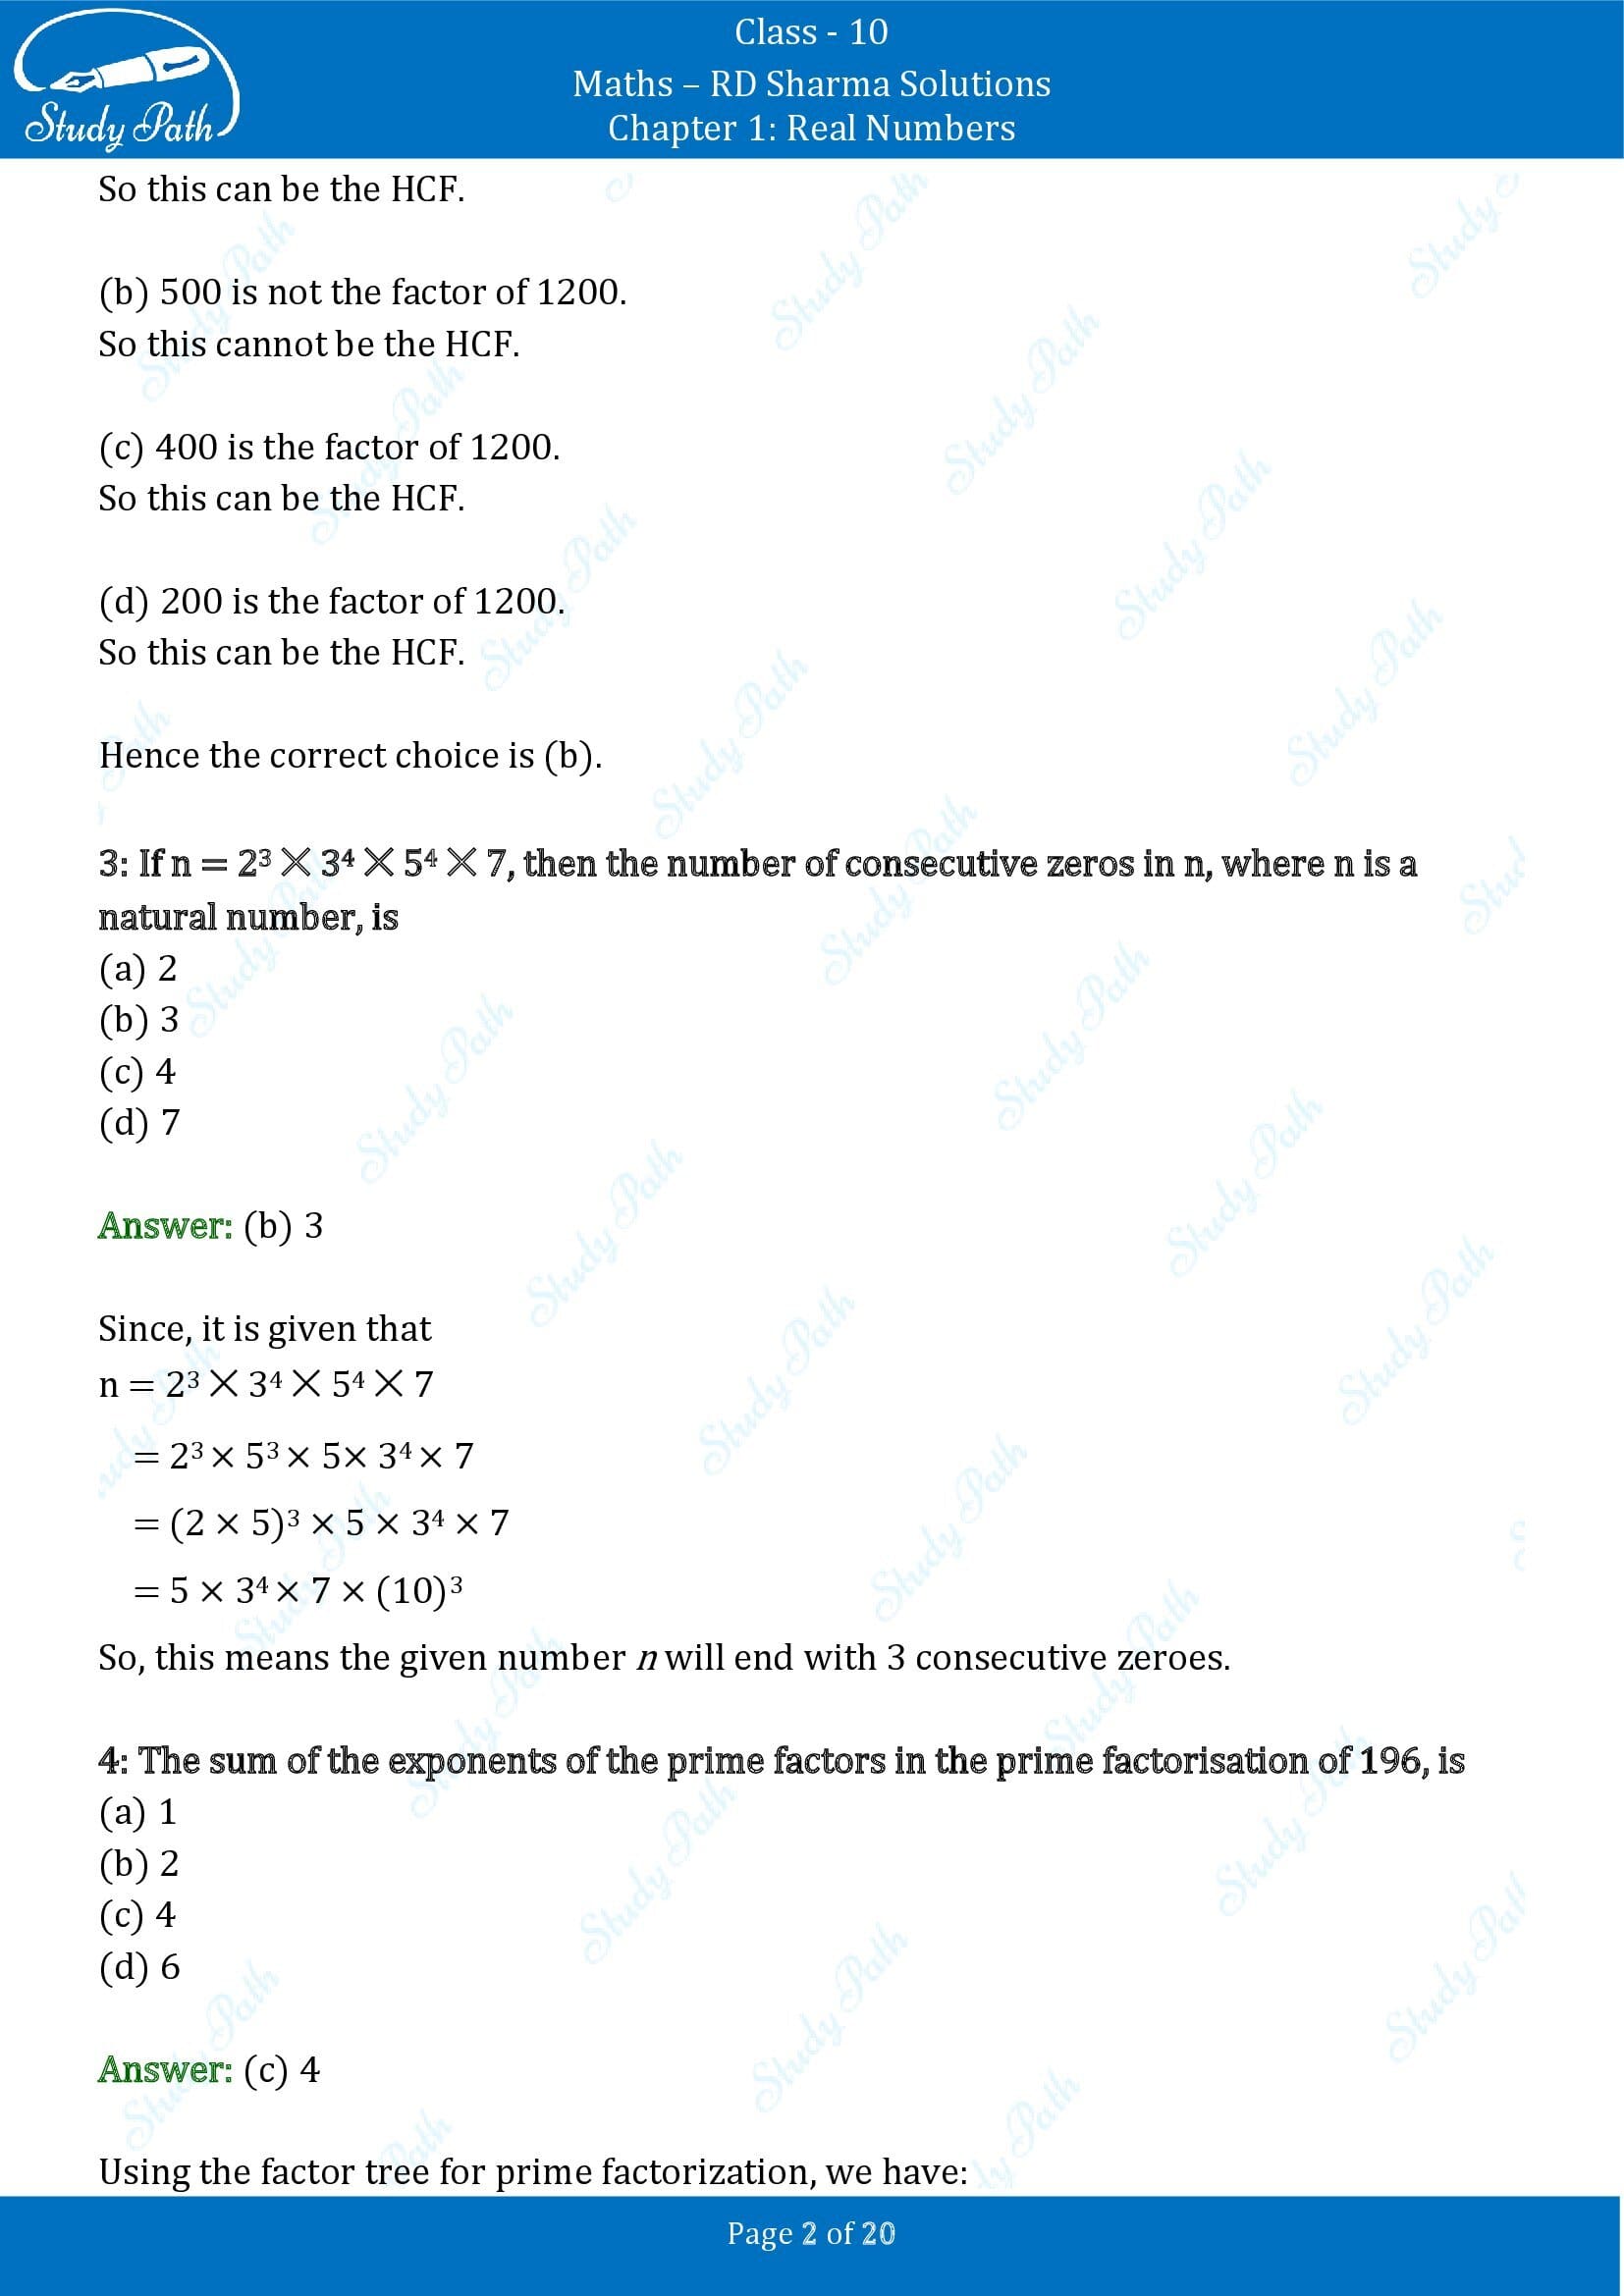 RD Sharma Solutions Class 10 Chapter 1 Real Numbers Multiple Choice Questions MCQs 00002